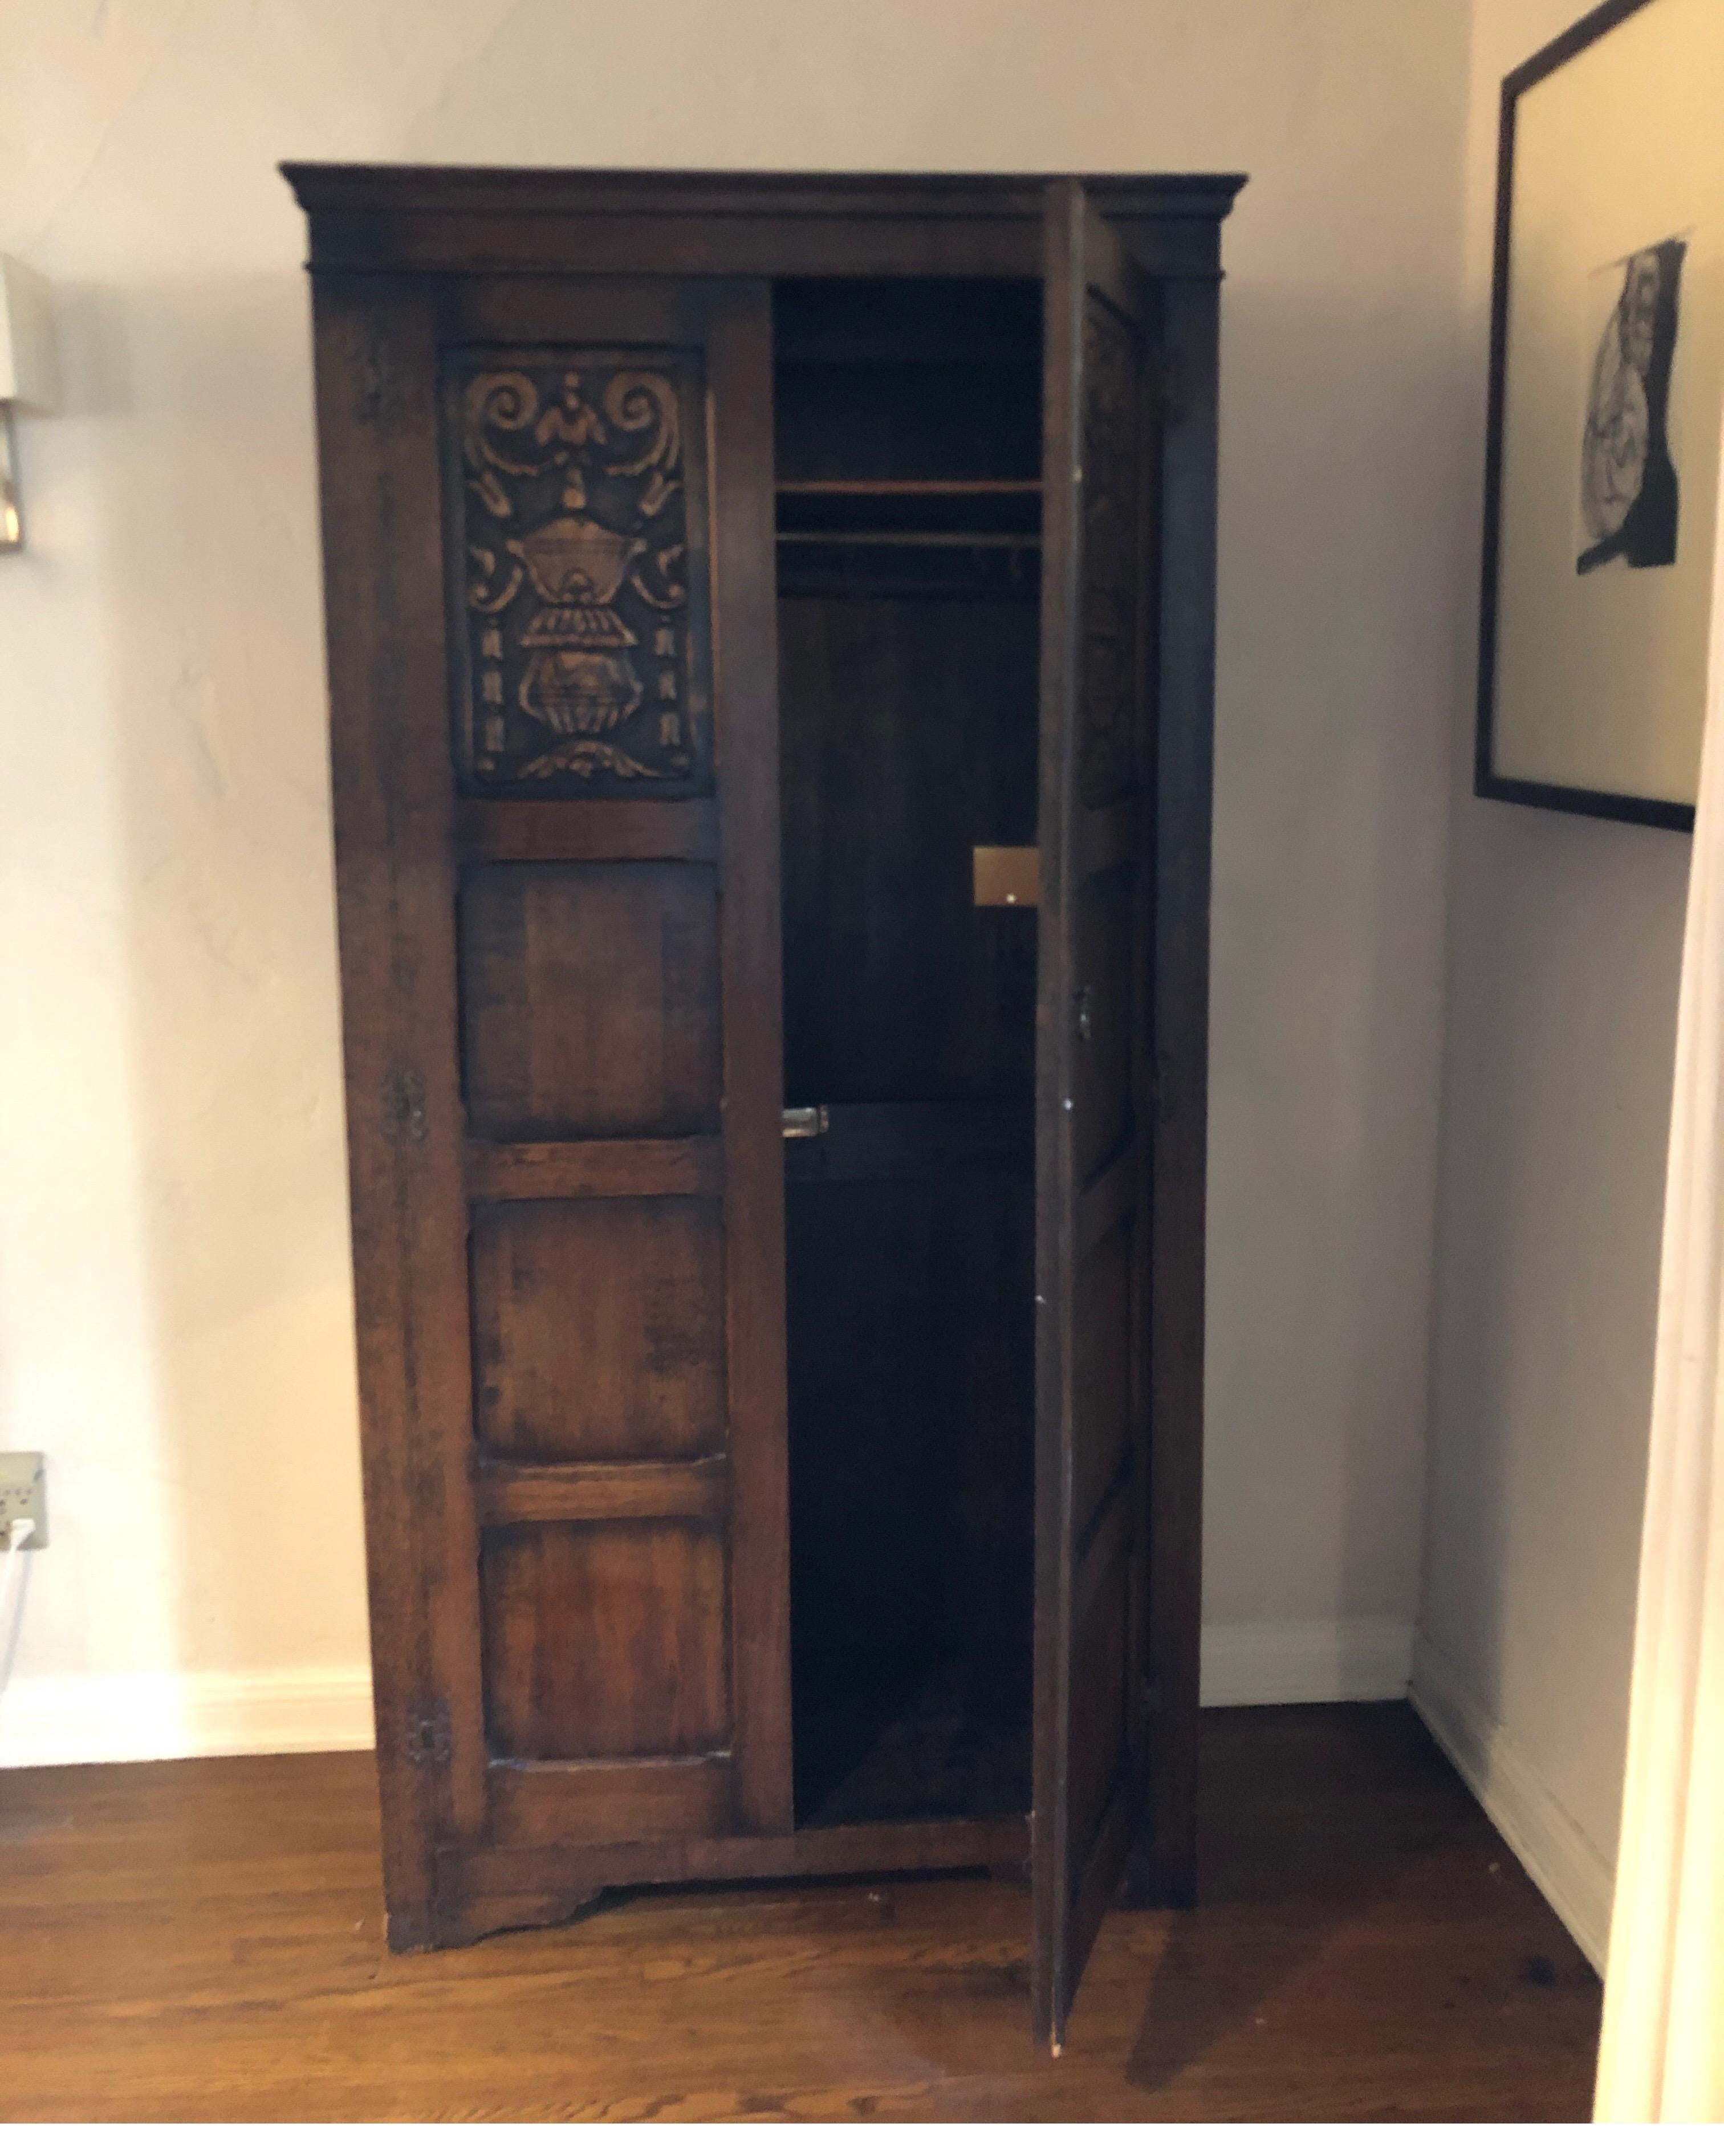 Rare solid antique camphor wood cabinet with original iron bar and hooks for hanging clothing/coats with shelf along the top. Doors and hinges work smoothly. Do not have the key so it remains unlocked.
Minor blemishes due to age. See pics.